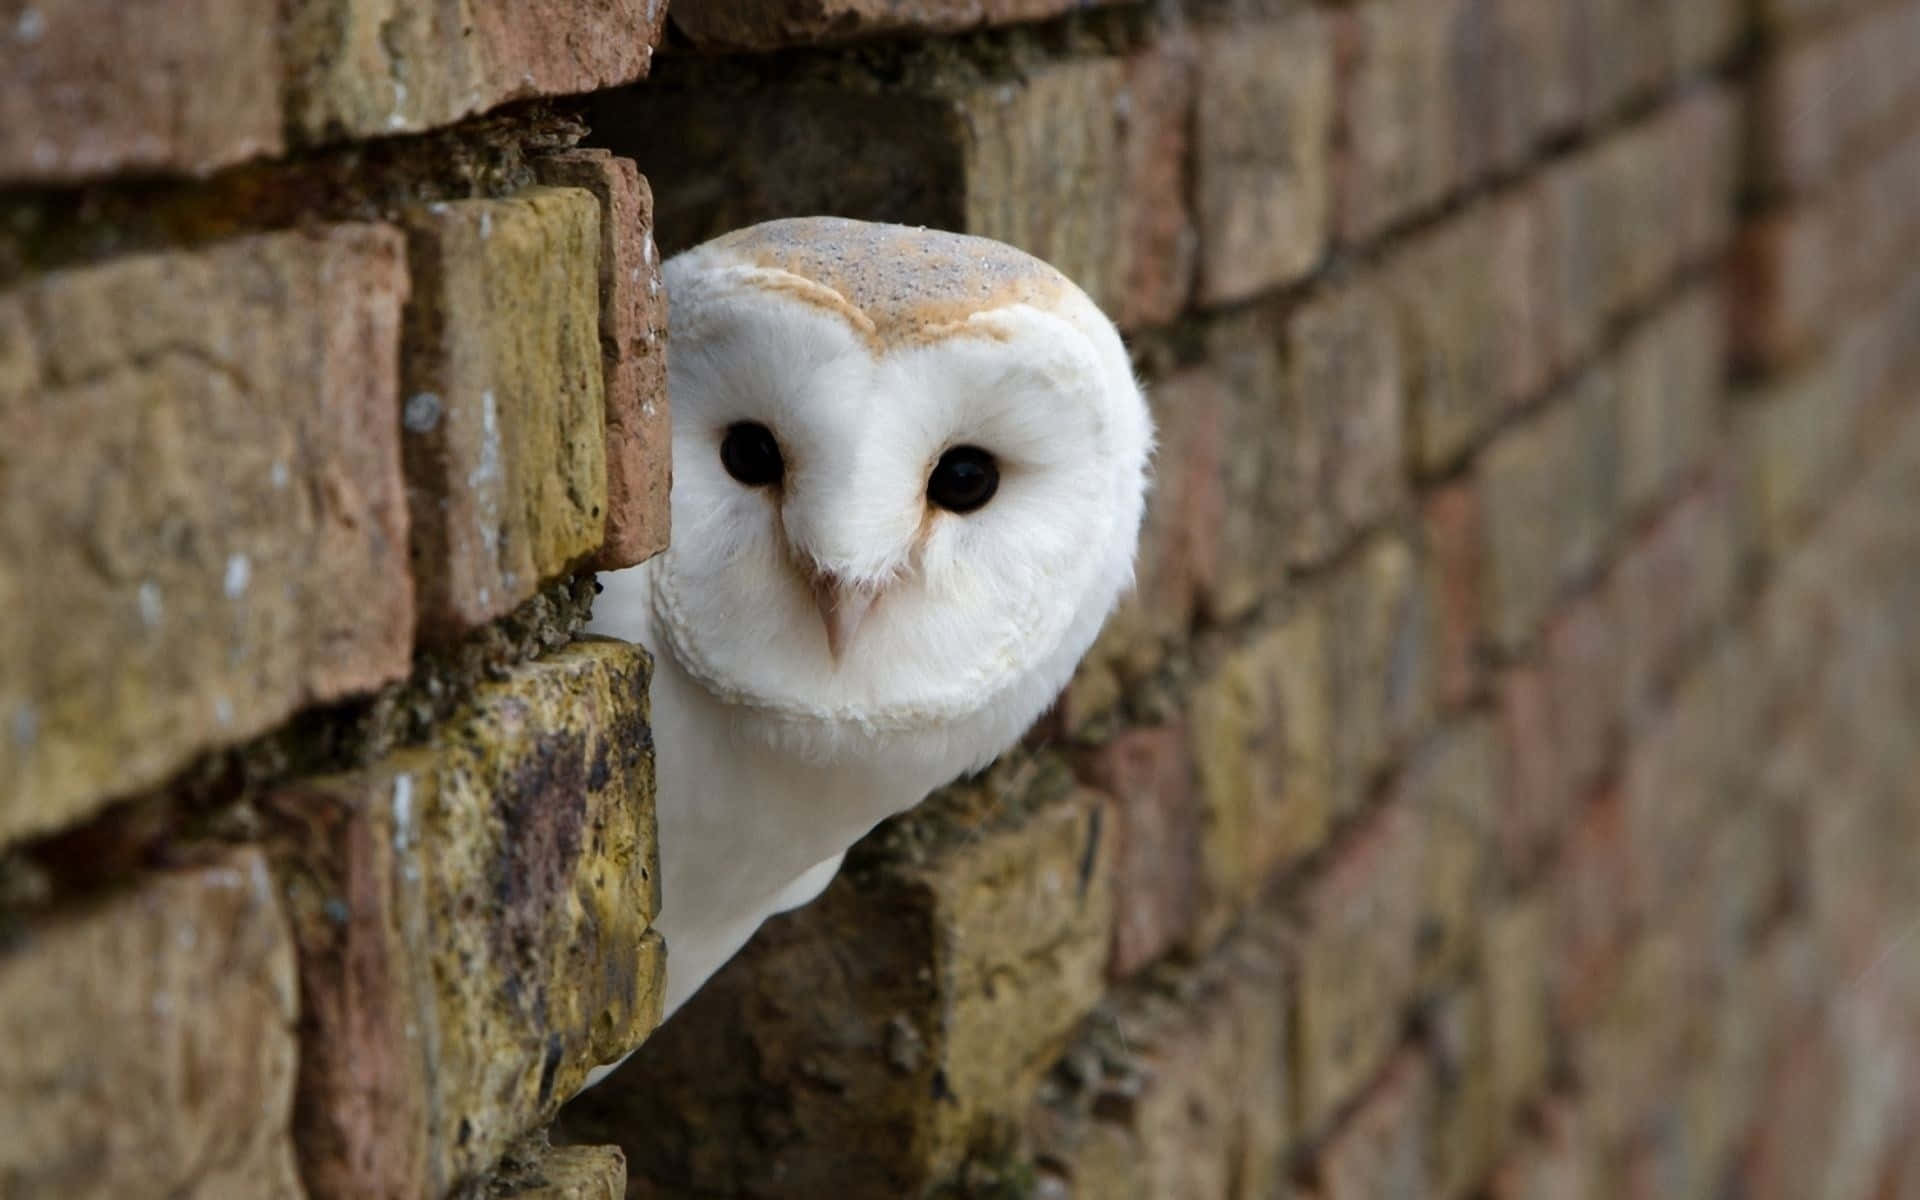 Look at this adorably cute owl!